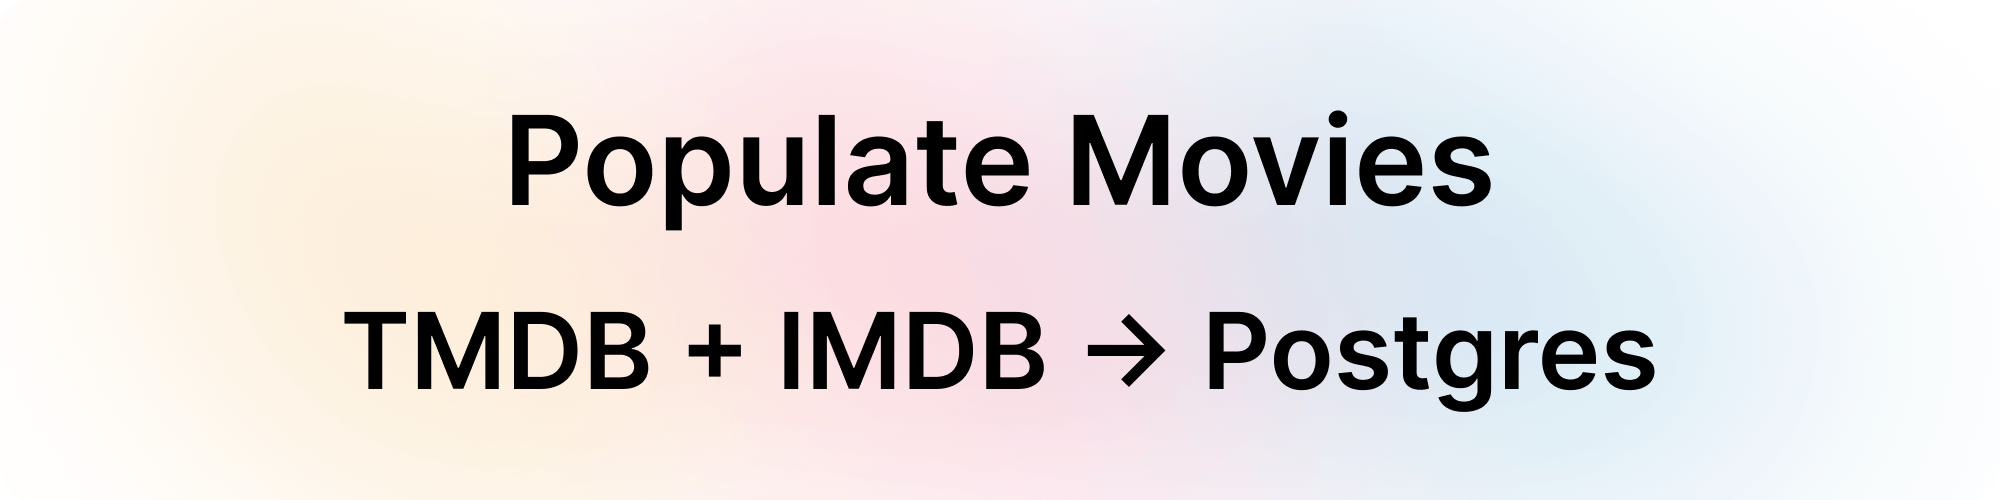 Populates a full database of movies from TMDB and IMDB into Postgres.